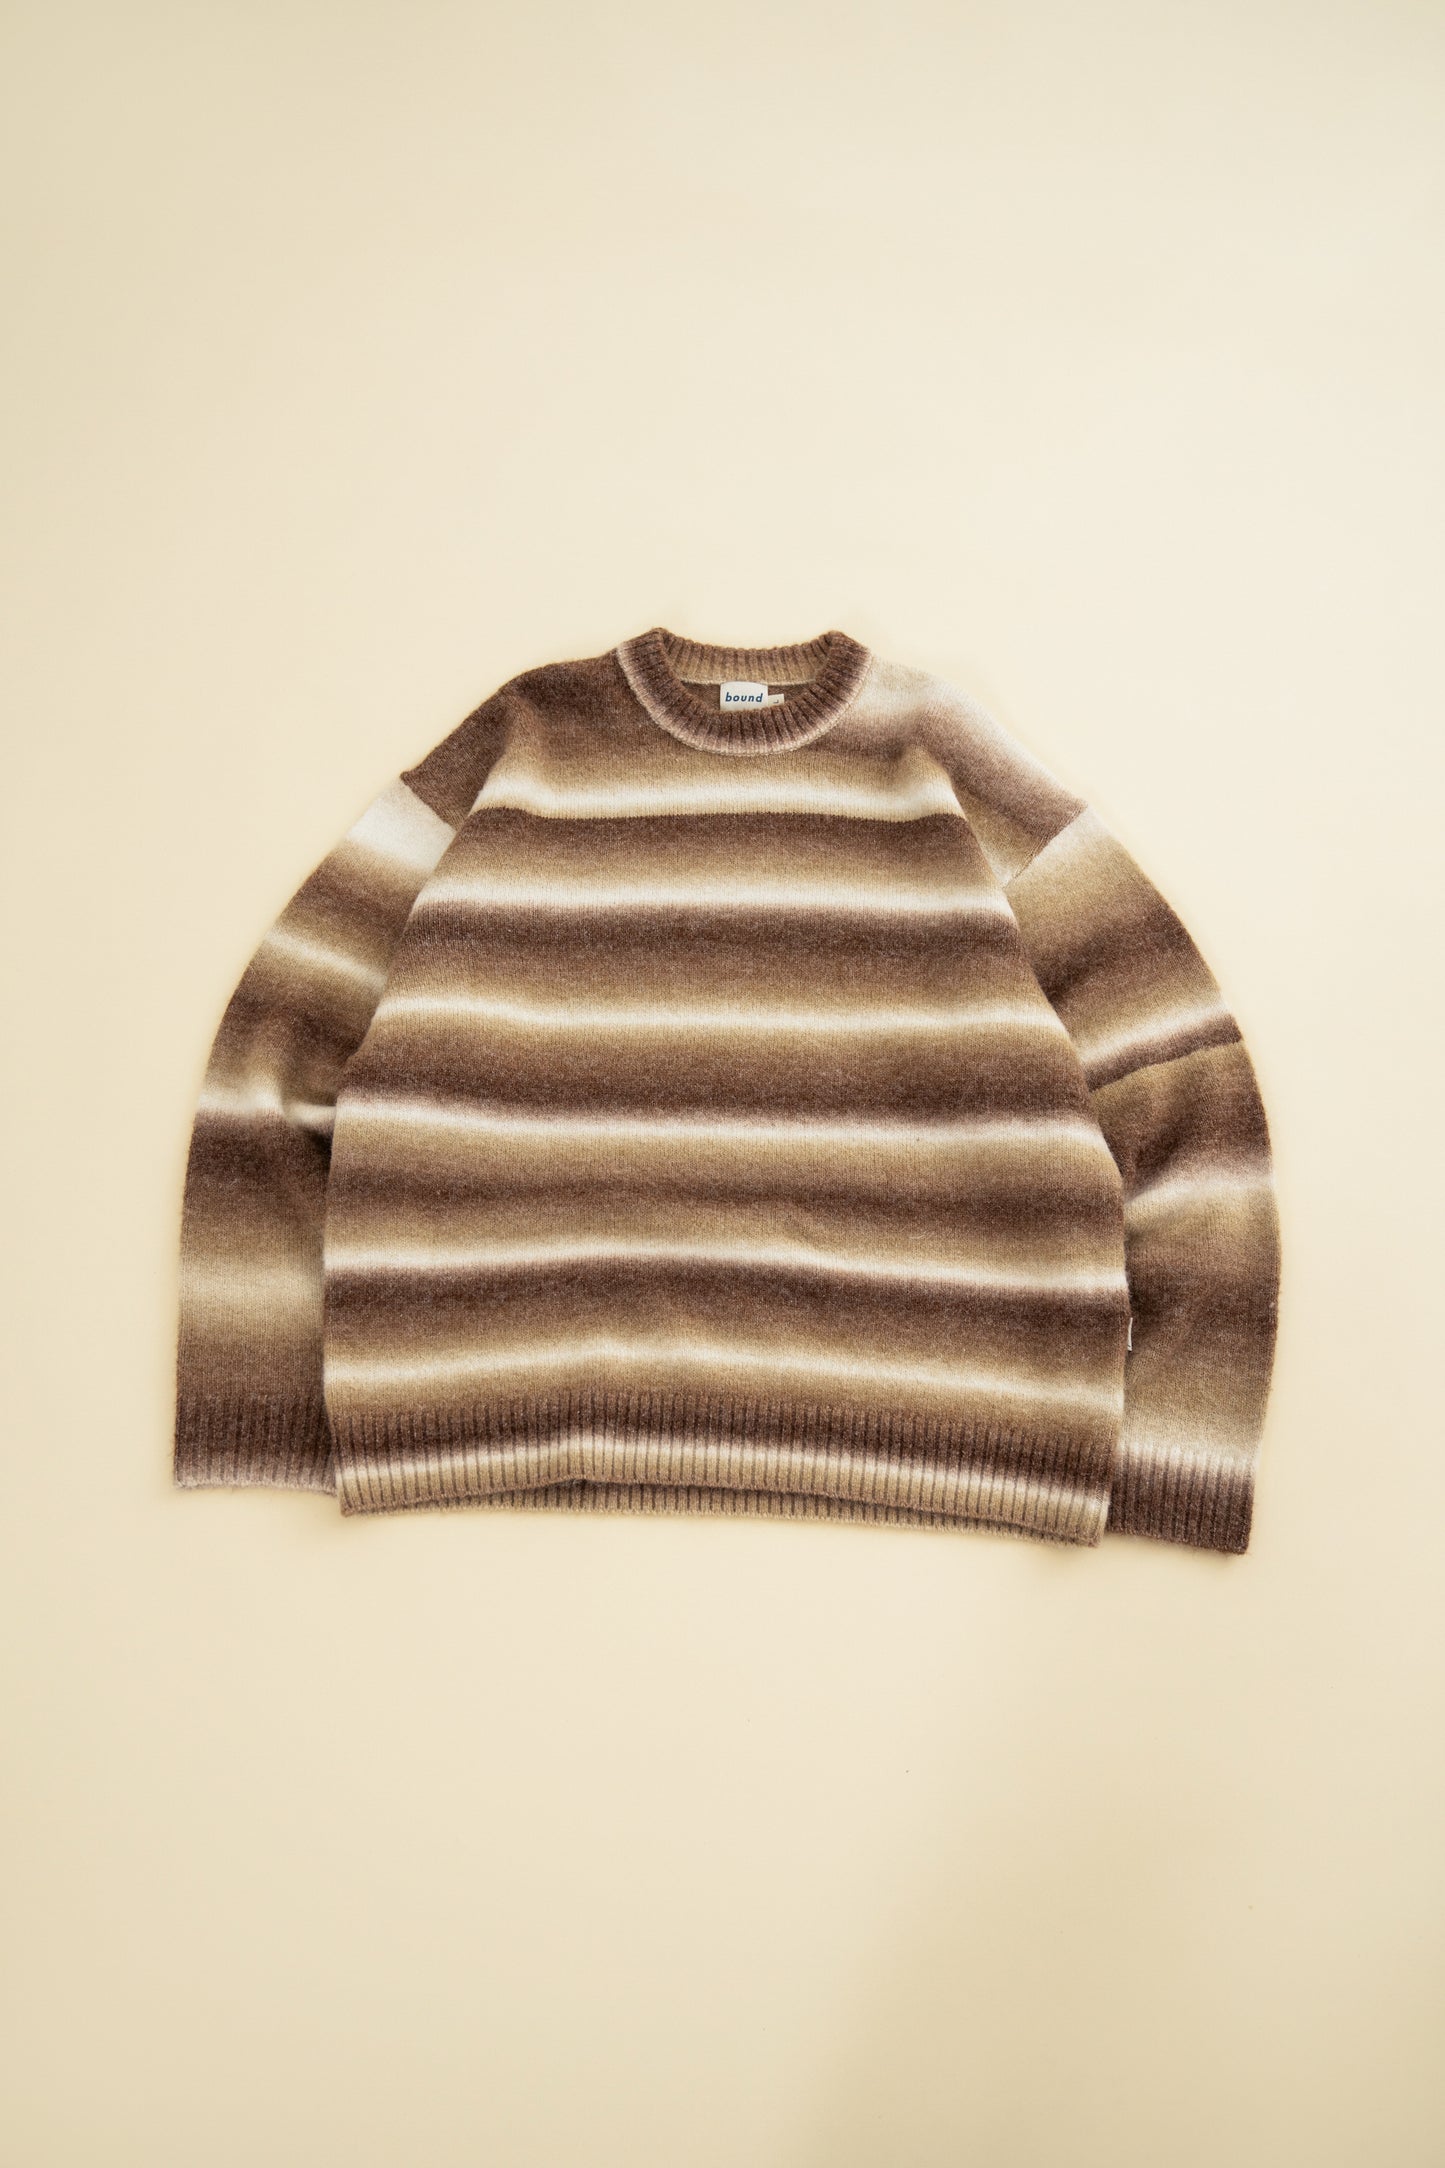 bound Toffee Ombre Knit Sweater